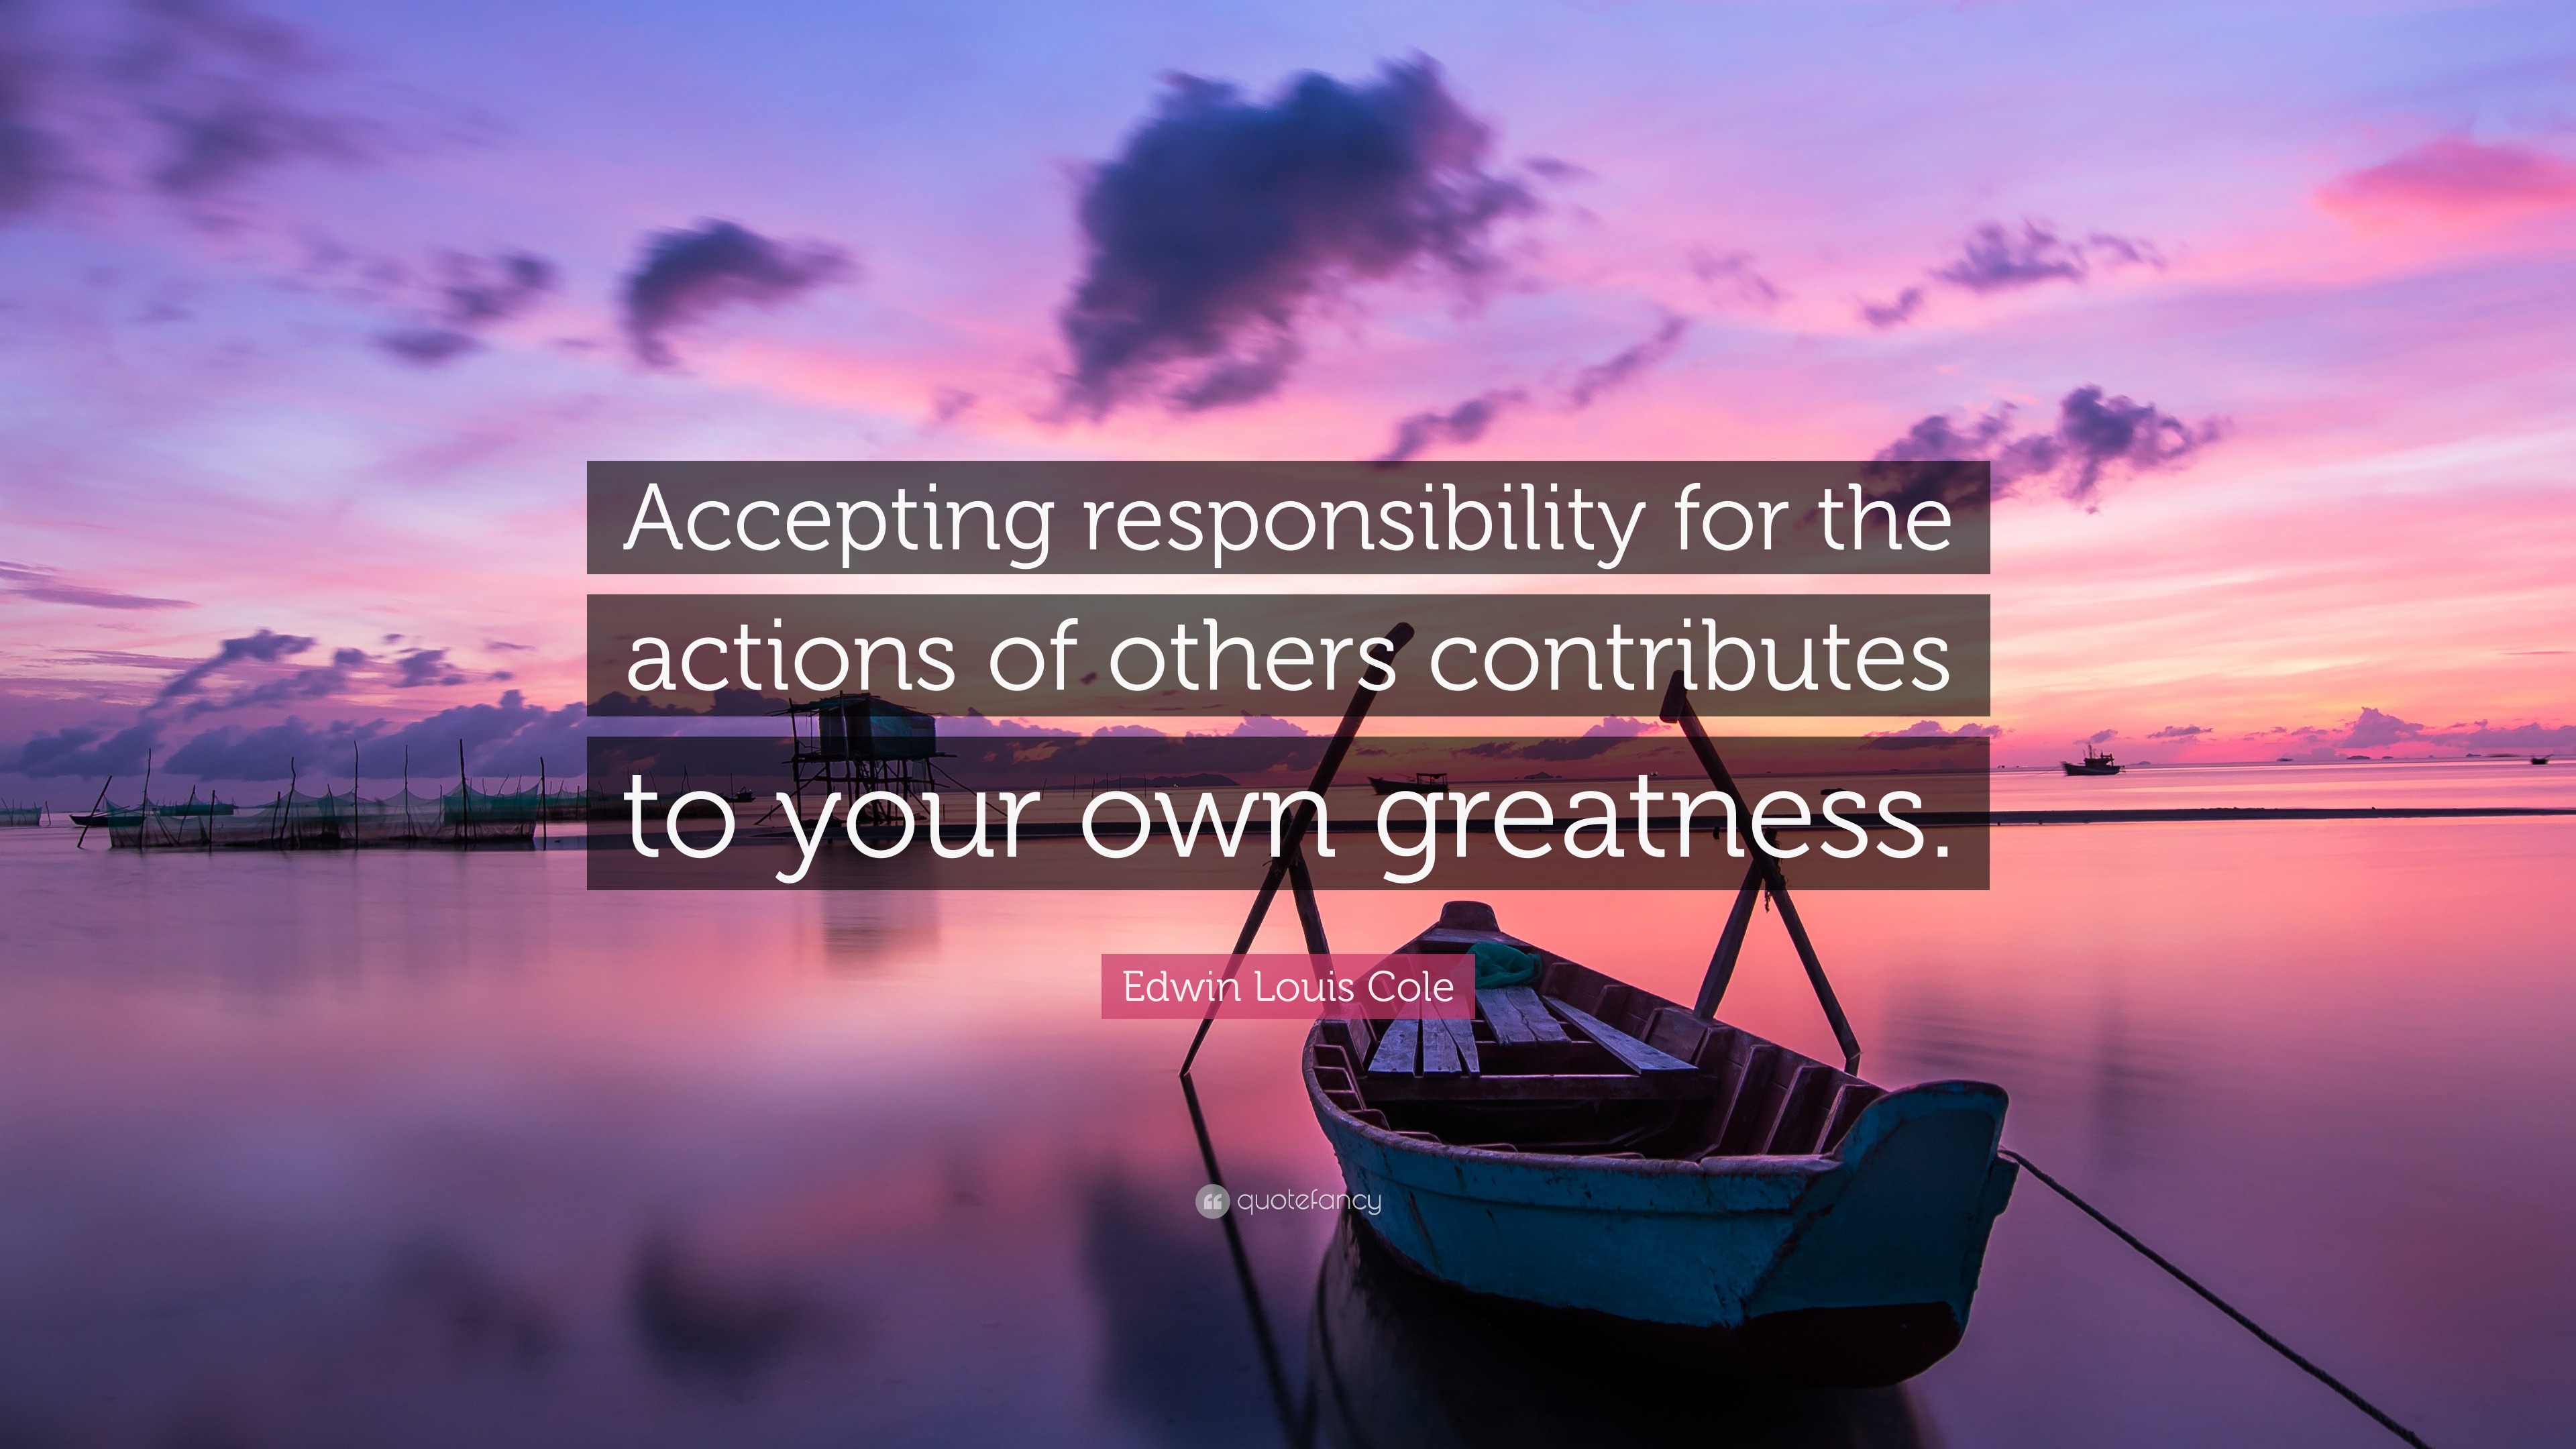 Edwin Louis Cole Quote: “Accepting responsibility for the actions of others  contributes to your own greatness.”